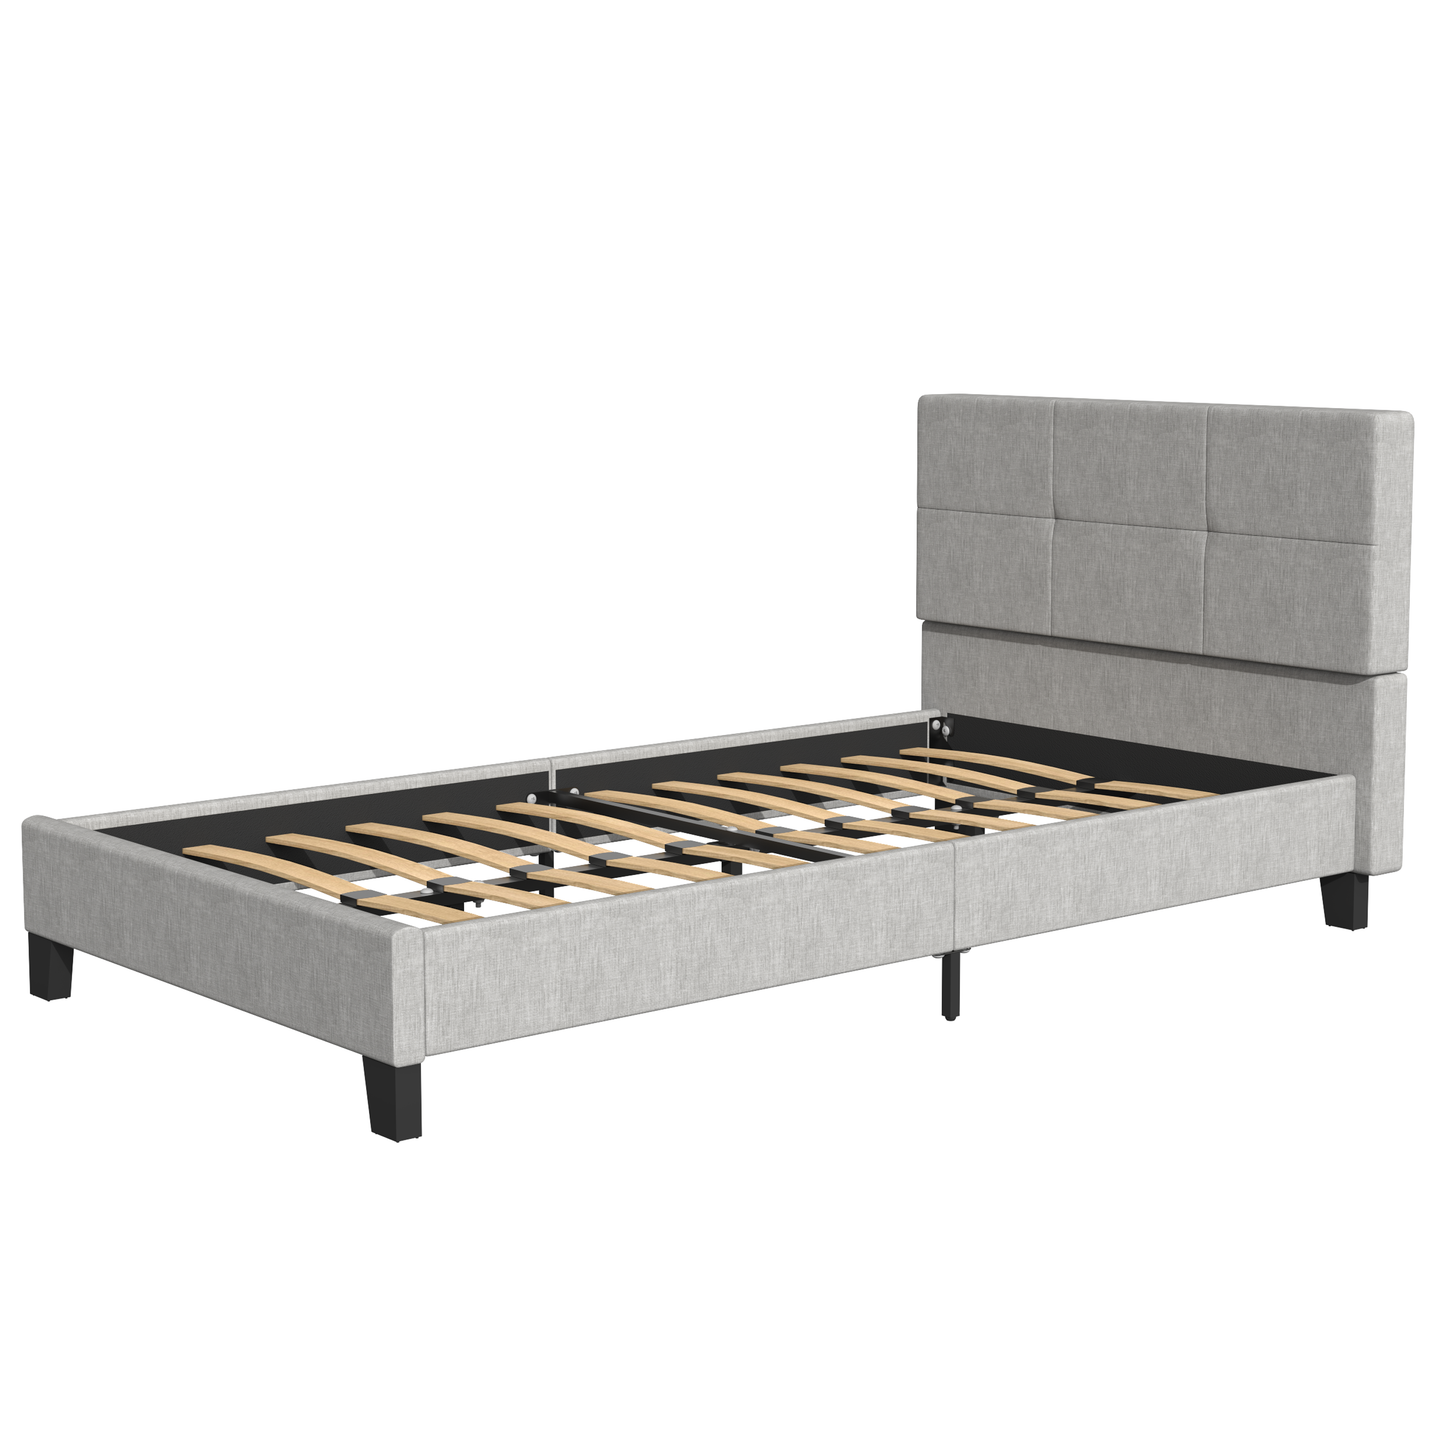 SYNGAR Twin Bed Frame, New Upgrade Twin Size Fabric Upholstered Platform Bed Frame with Height Adjustable Headboard, Bedroom Furniture Metal Frame Platform Bed Frame, No Box Spring Needed, Grey